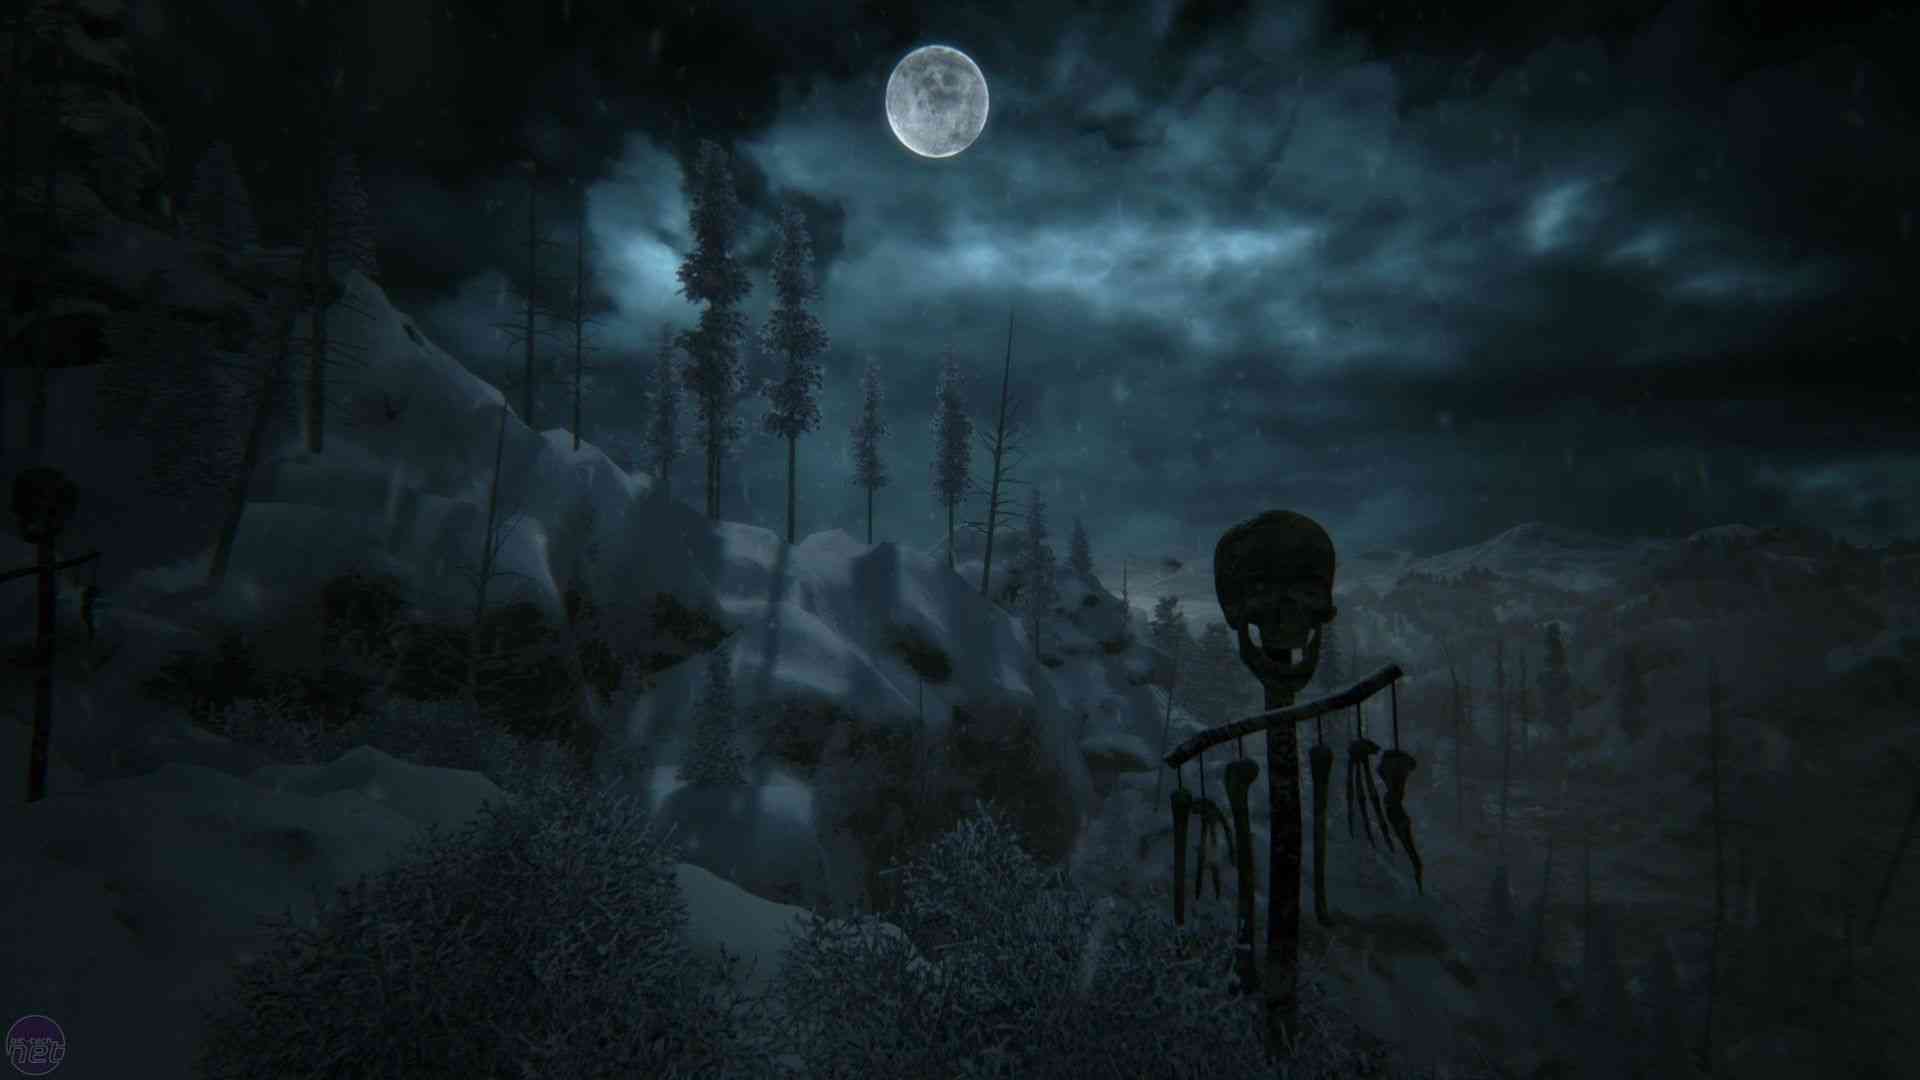 adventure horror game kholat is now free on steam 1557 big 1